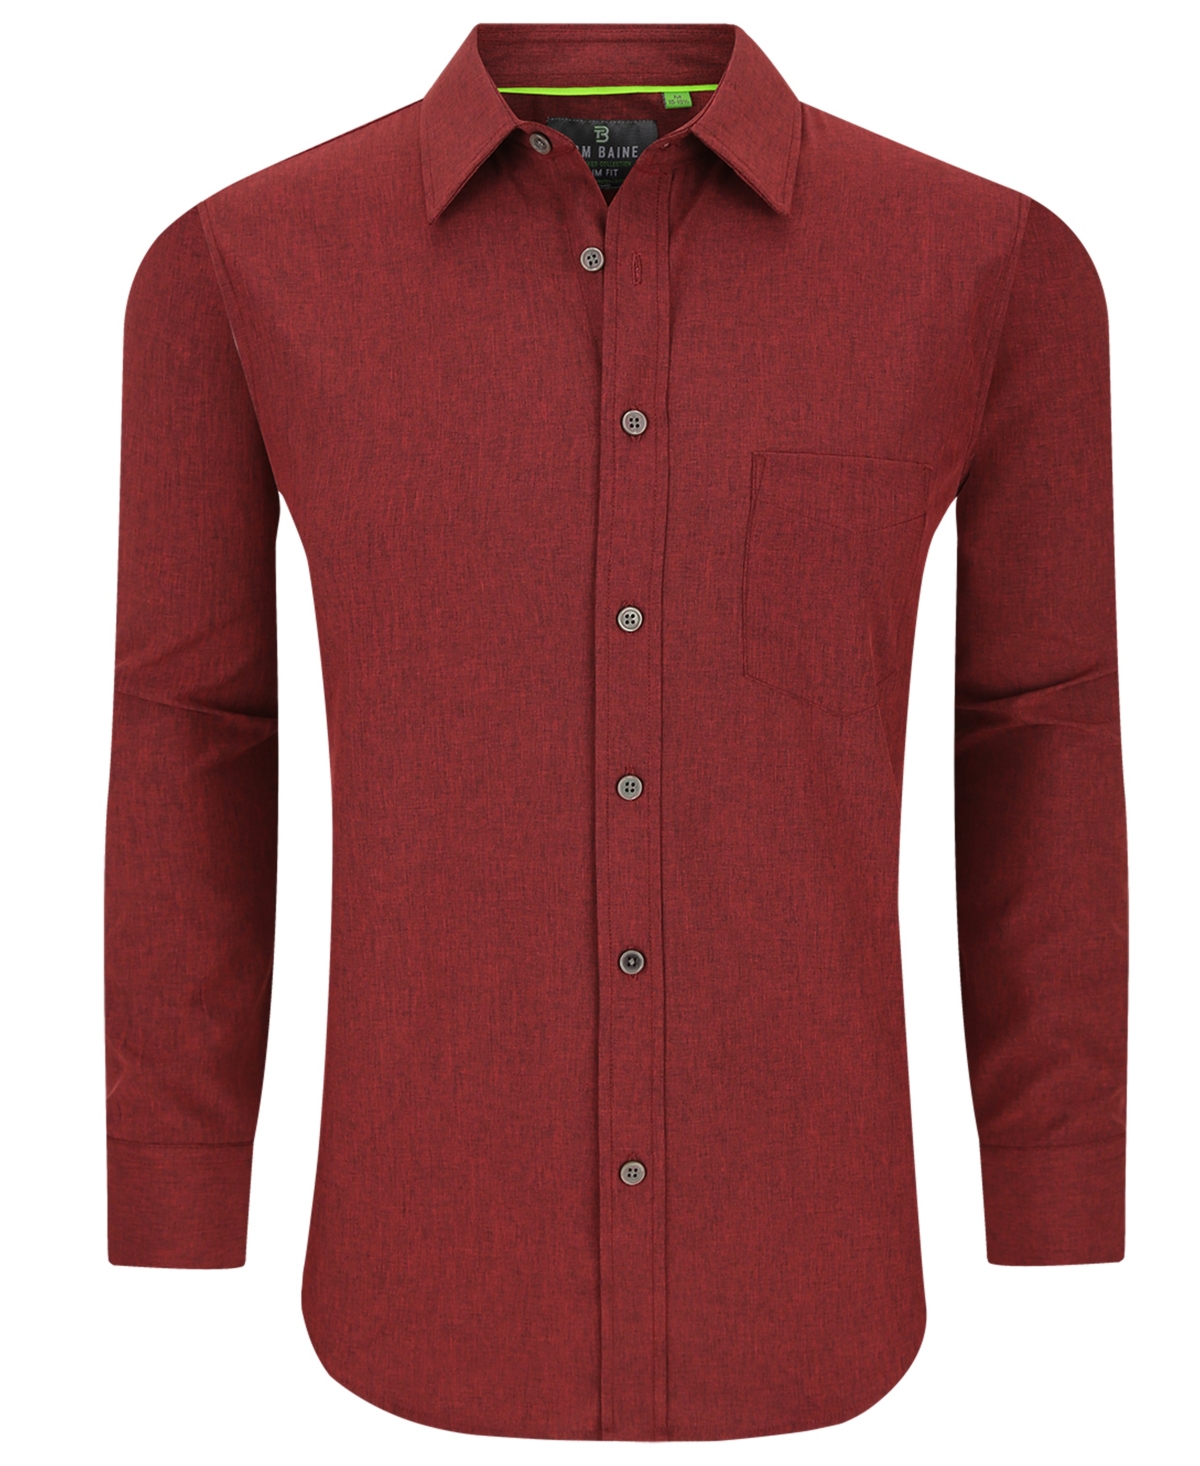 Shop Tom Baine Men's Slim Fit Performance Long Sleeve Solid Button Down Dress Shirt In Burgundy